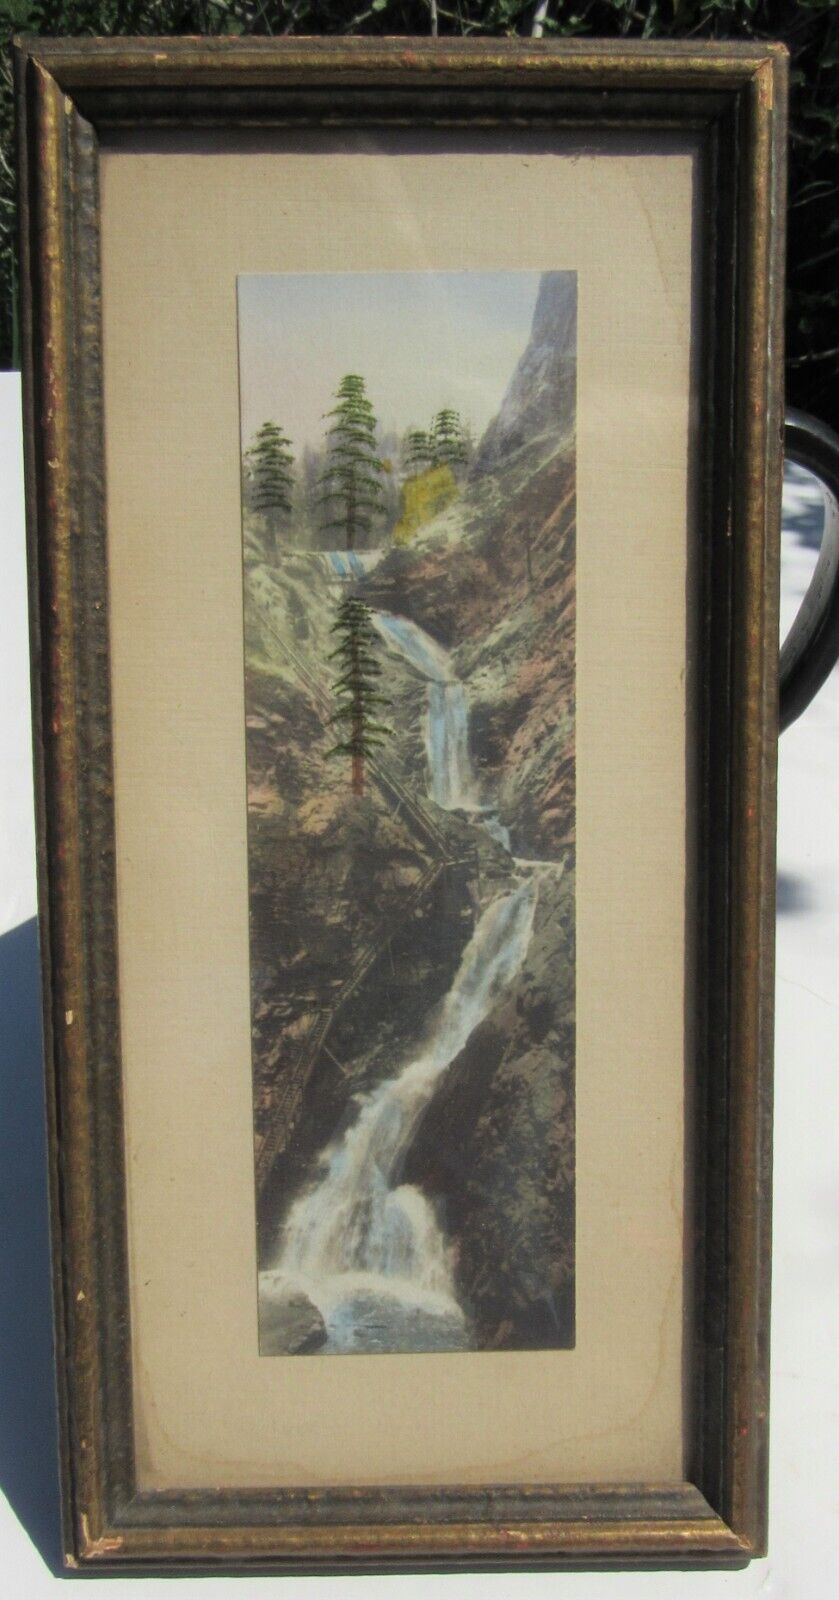 Antique Hand Tinted Waterfall Landscape Photograph Marshall Field & Co. Framed